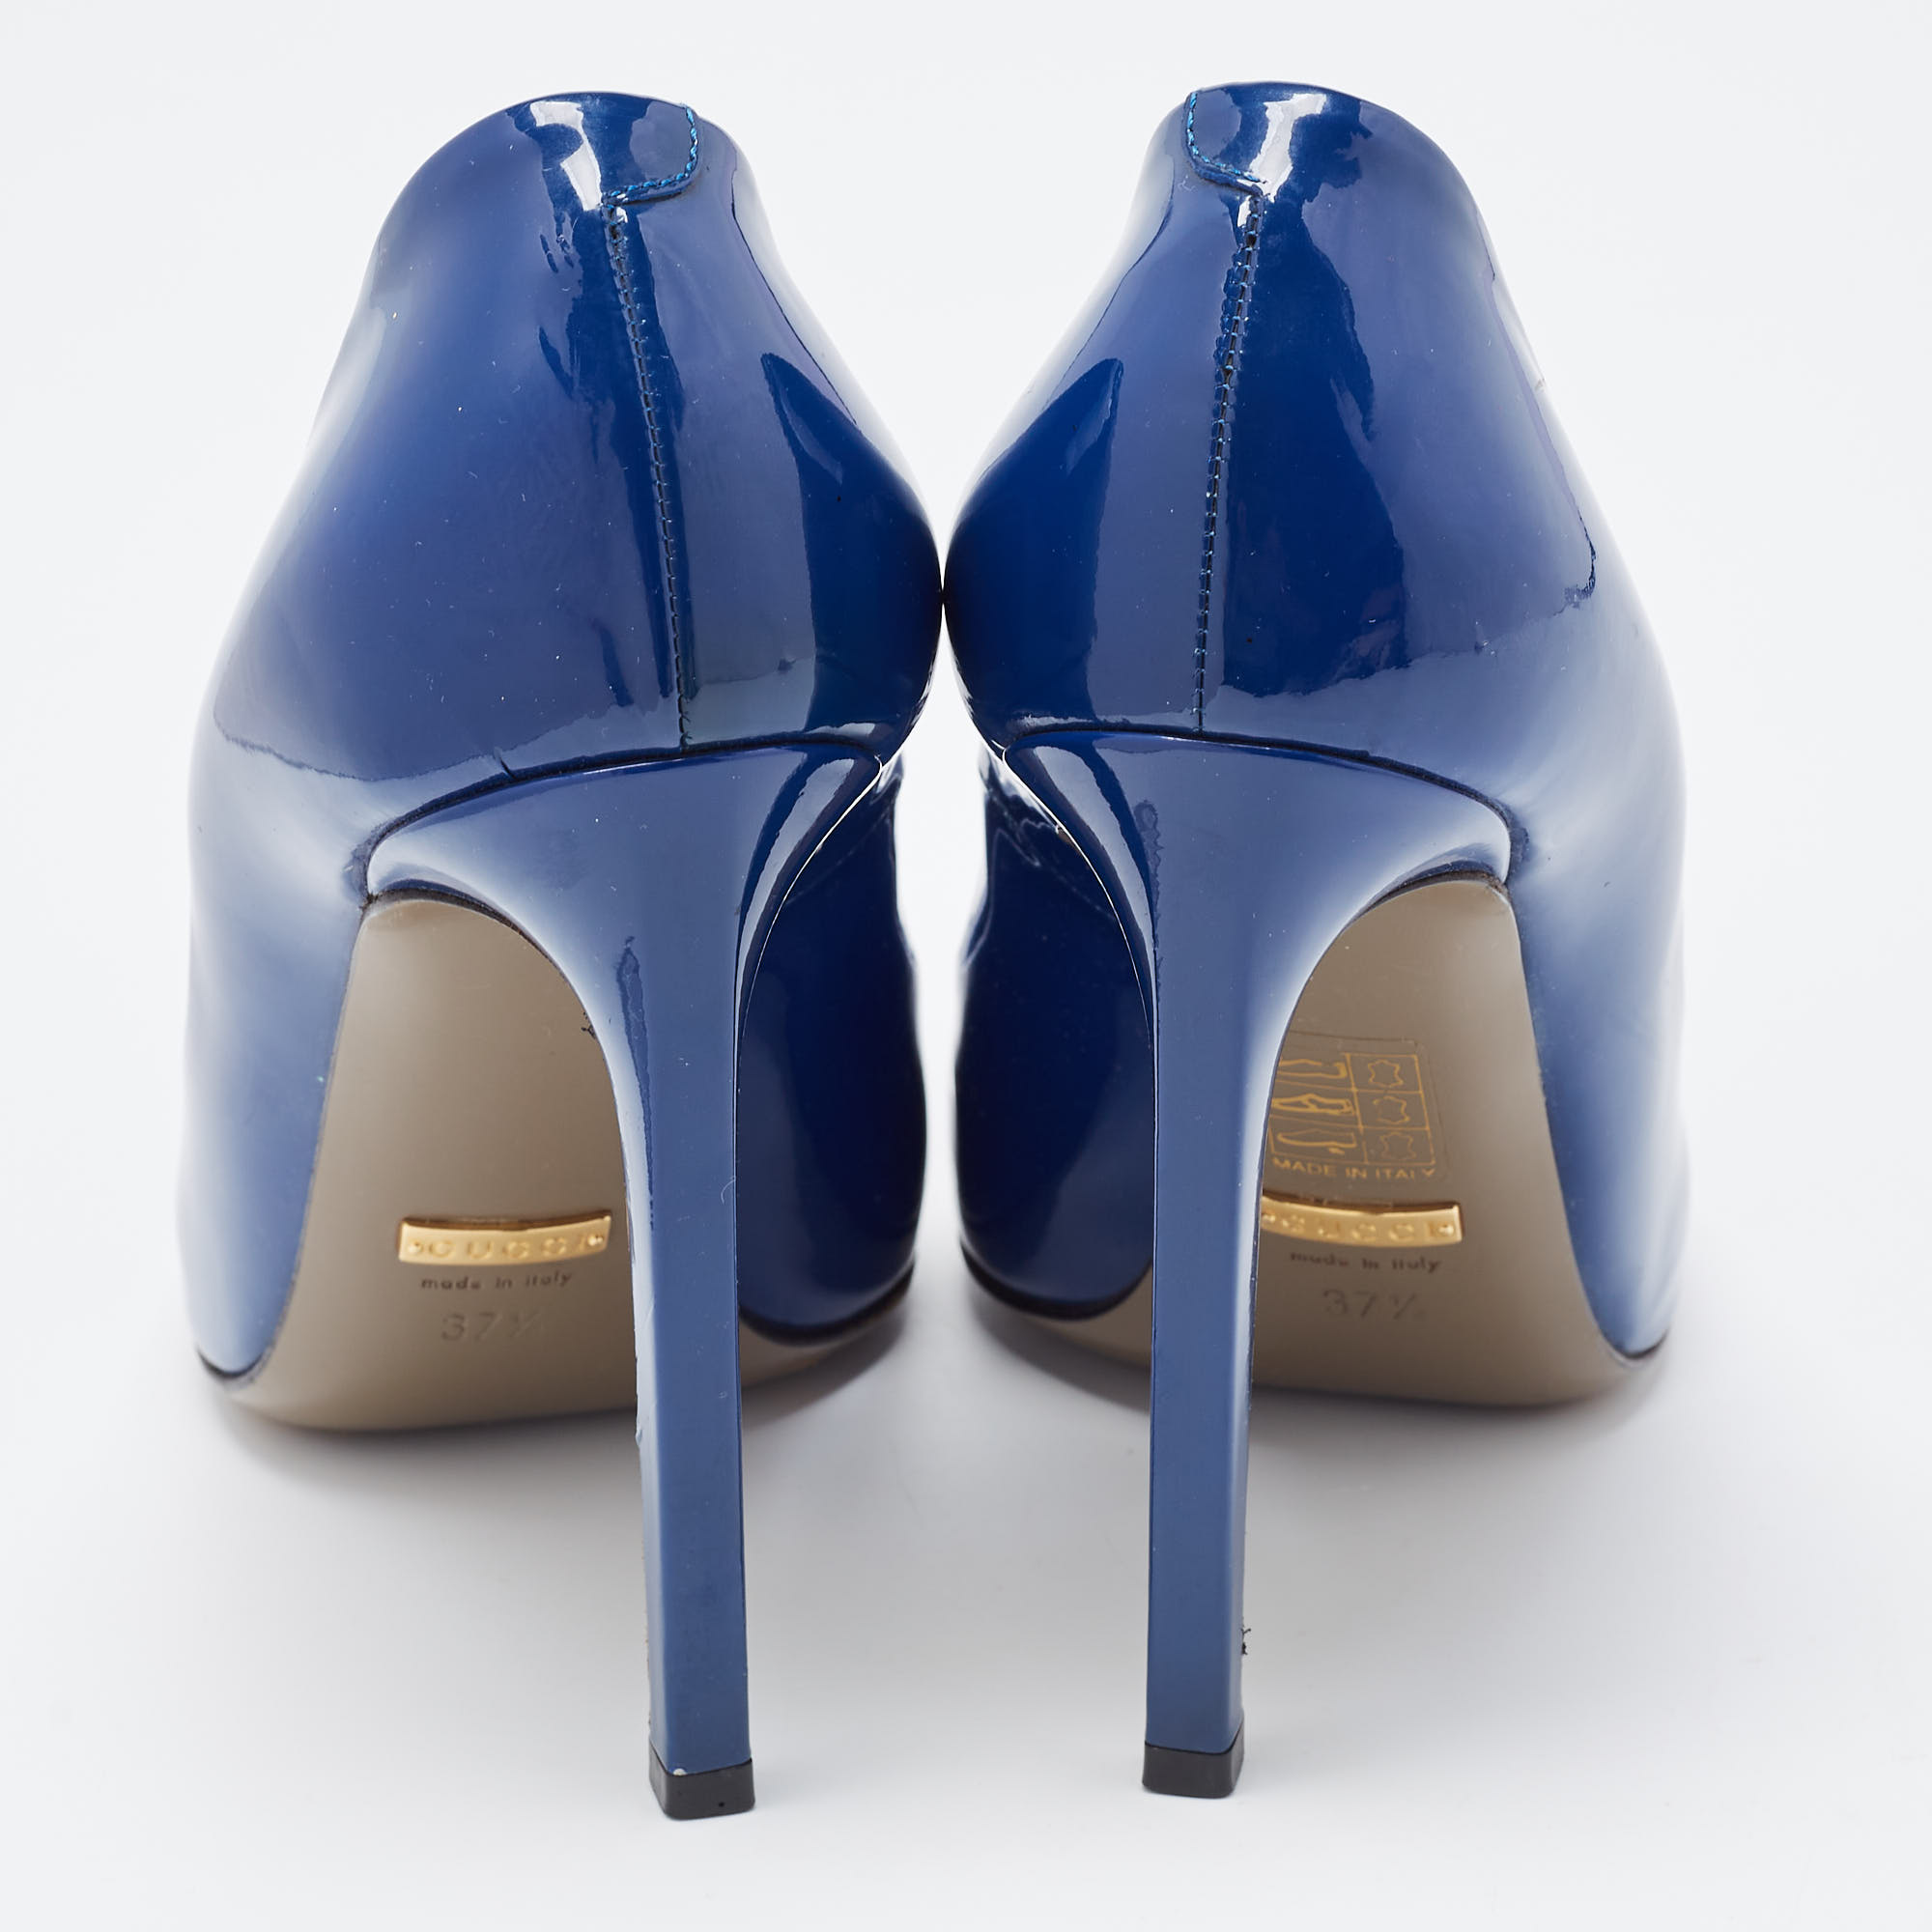 Gucci Royal Blue Patent Leather Pointed Toe Pumps Size 37.5